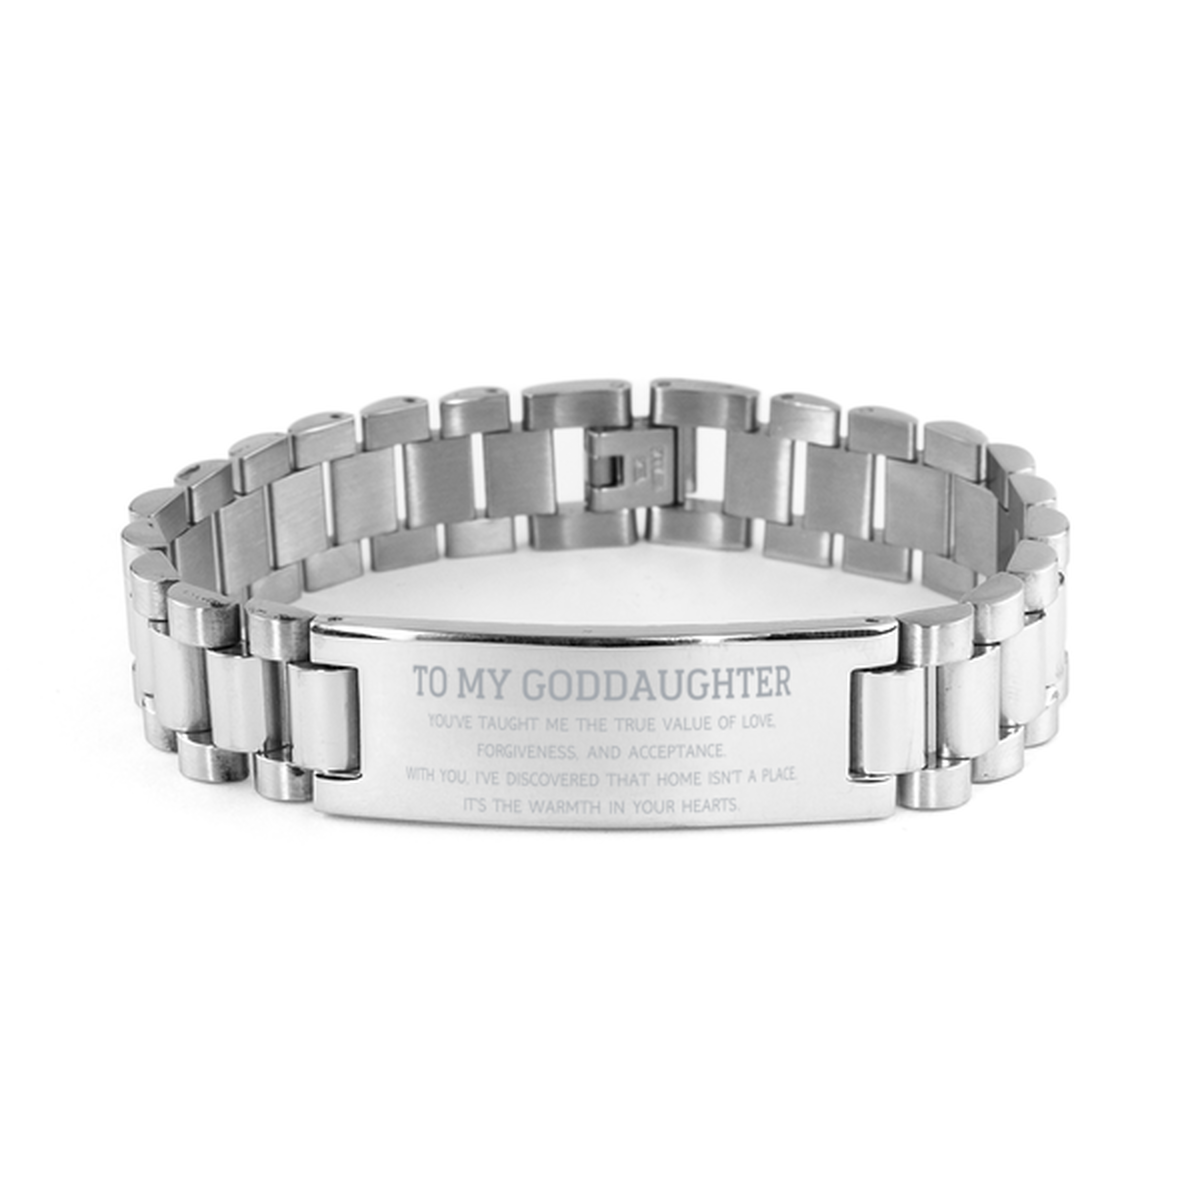 To My Goddaughter Gifts, You've taught me the true value of love, Thank You Gifts For Goddaughter, Birthday Ladder Stainless Steel Bracelet For Goddaughter